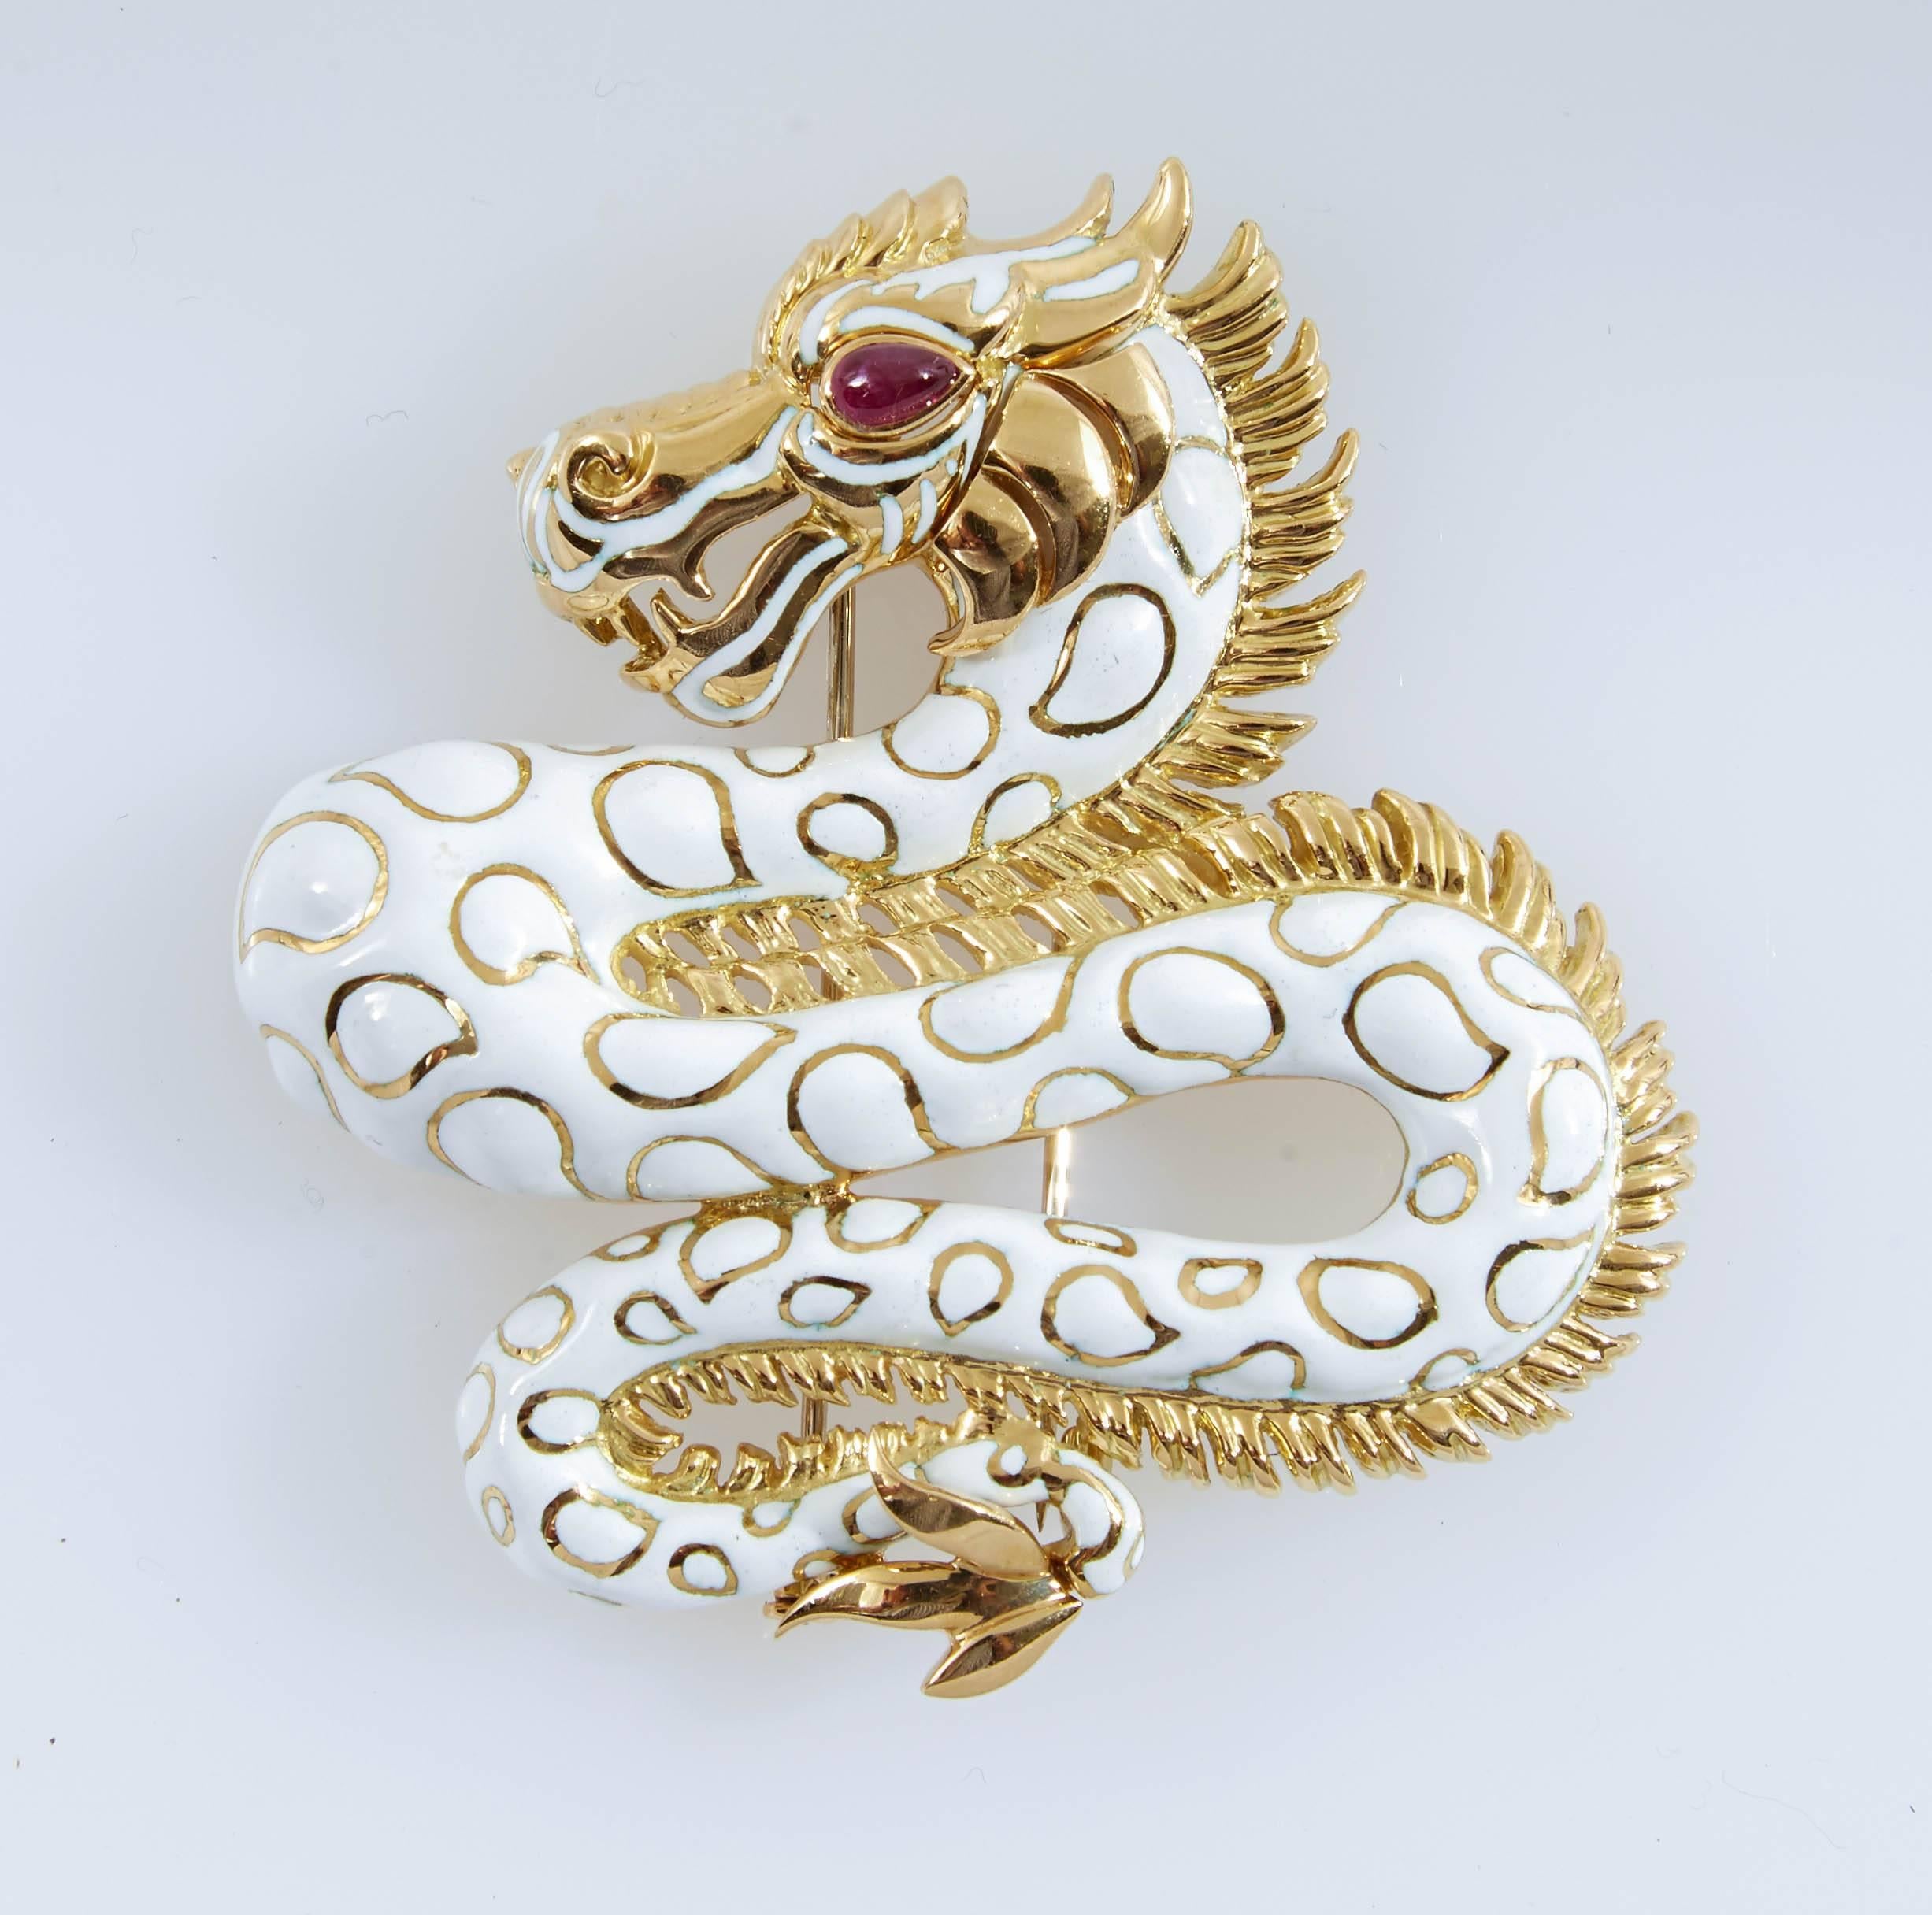 White enamel dragon brooch finely crafted in 18 k yellow gold accented with round brilliant cut Diamonds and cabochon Ruby. Signed David Webb